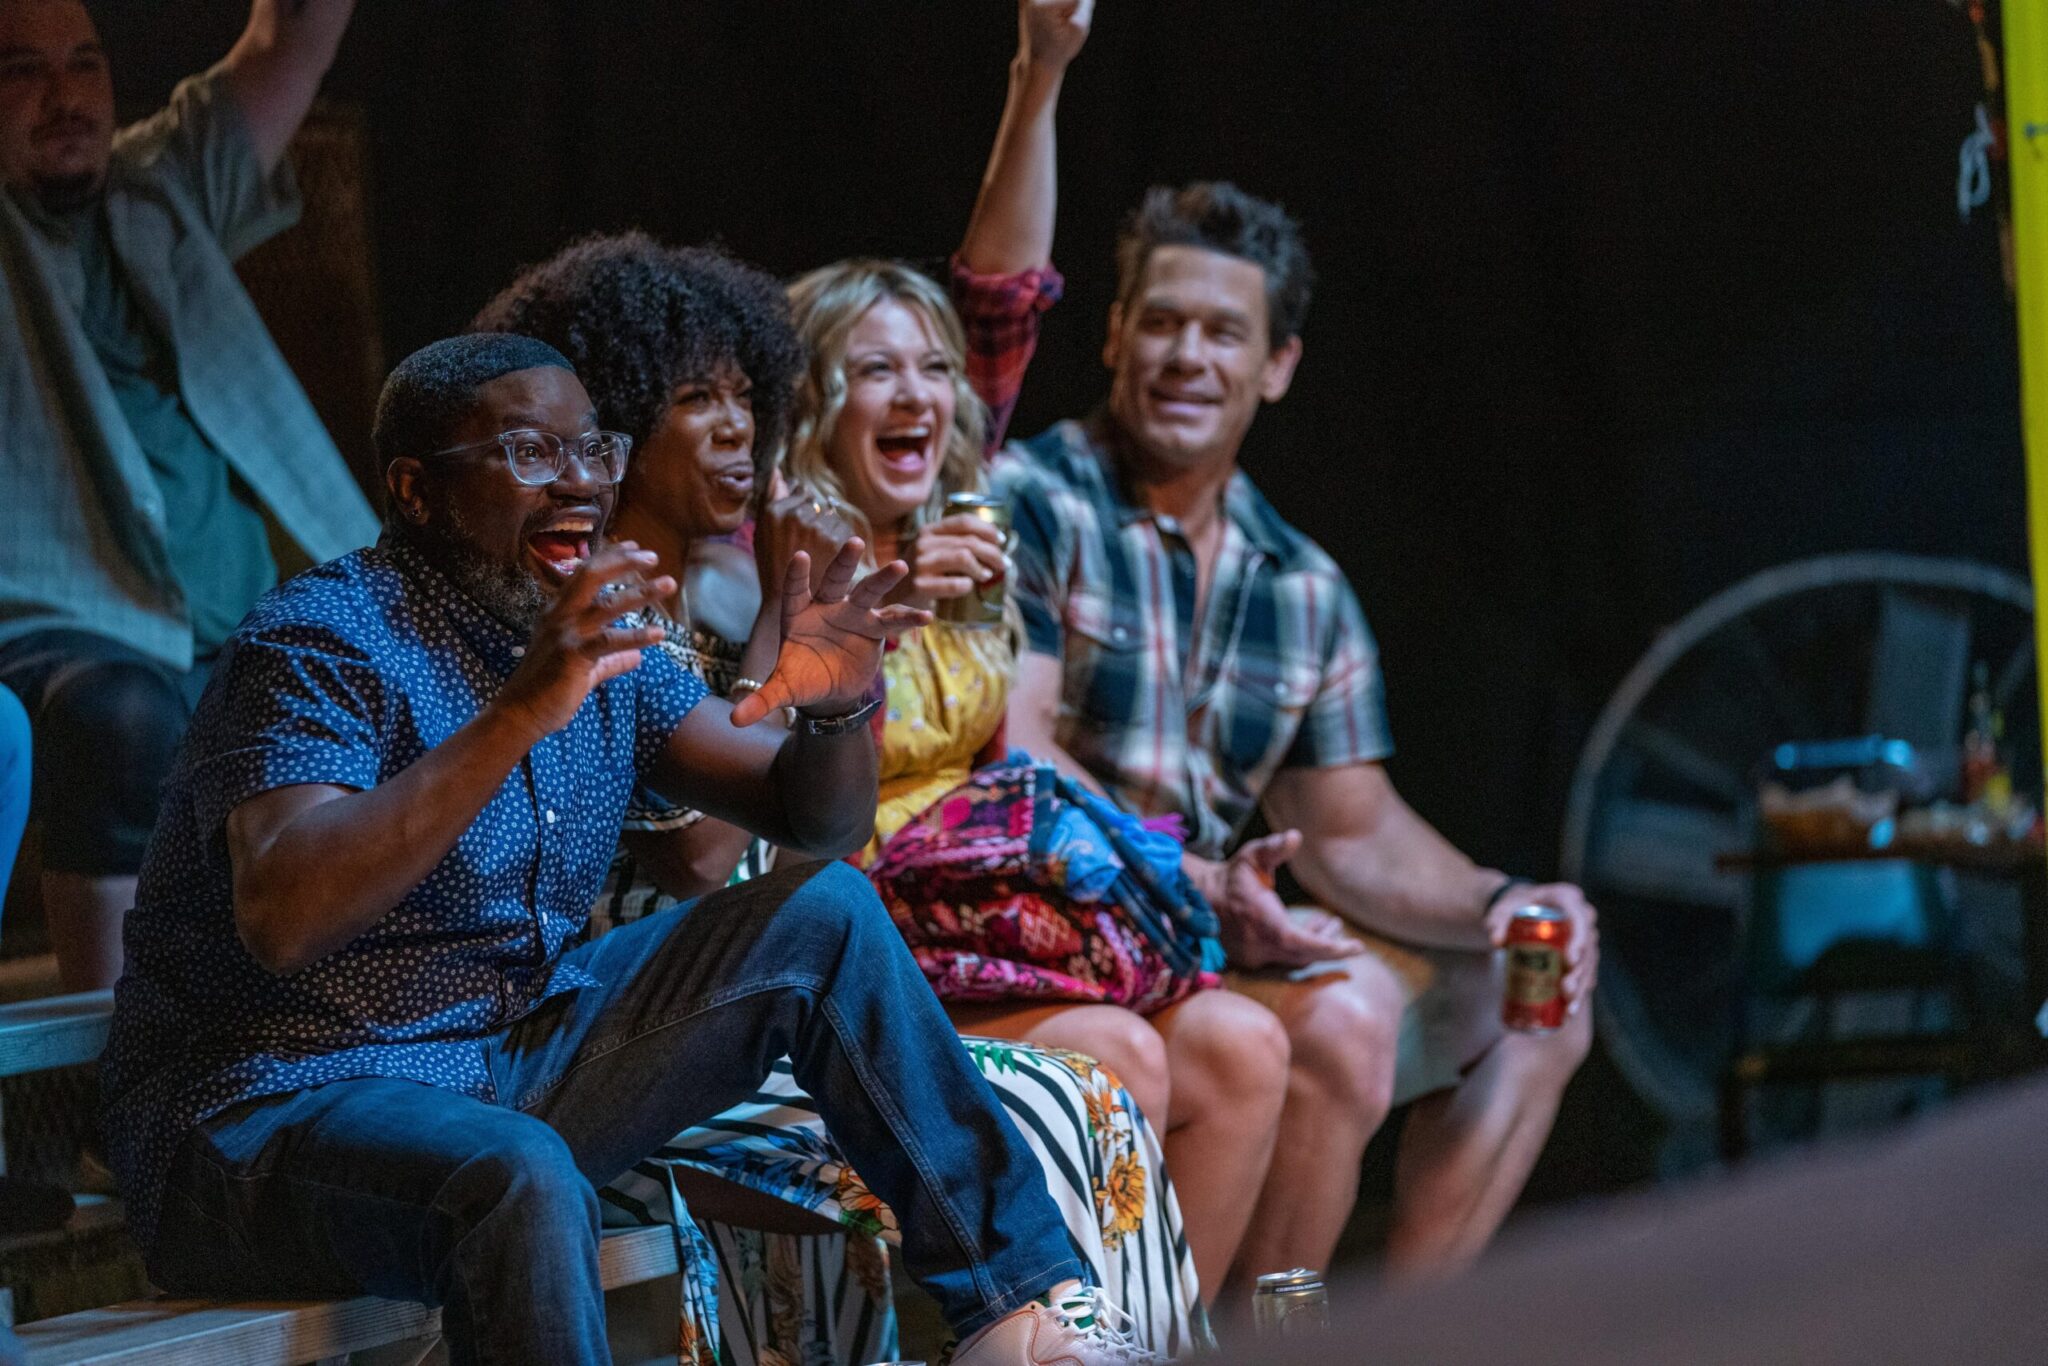 Lil Rel Howery, Yvonne Orji, Meredith Hagner, and John Cena in Vacation Friends